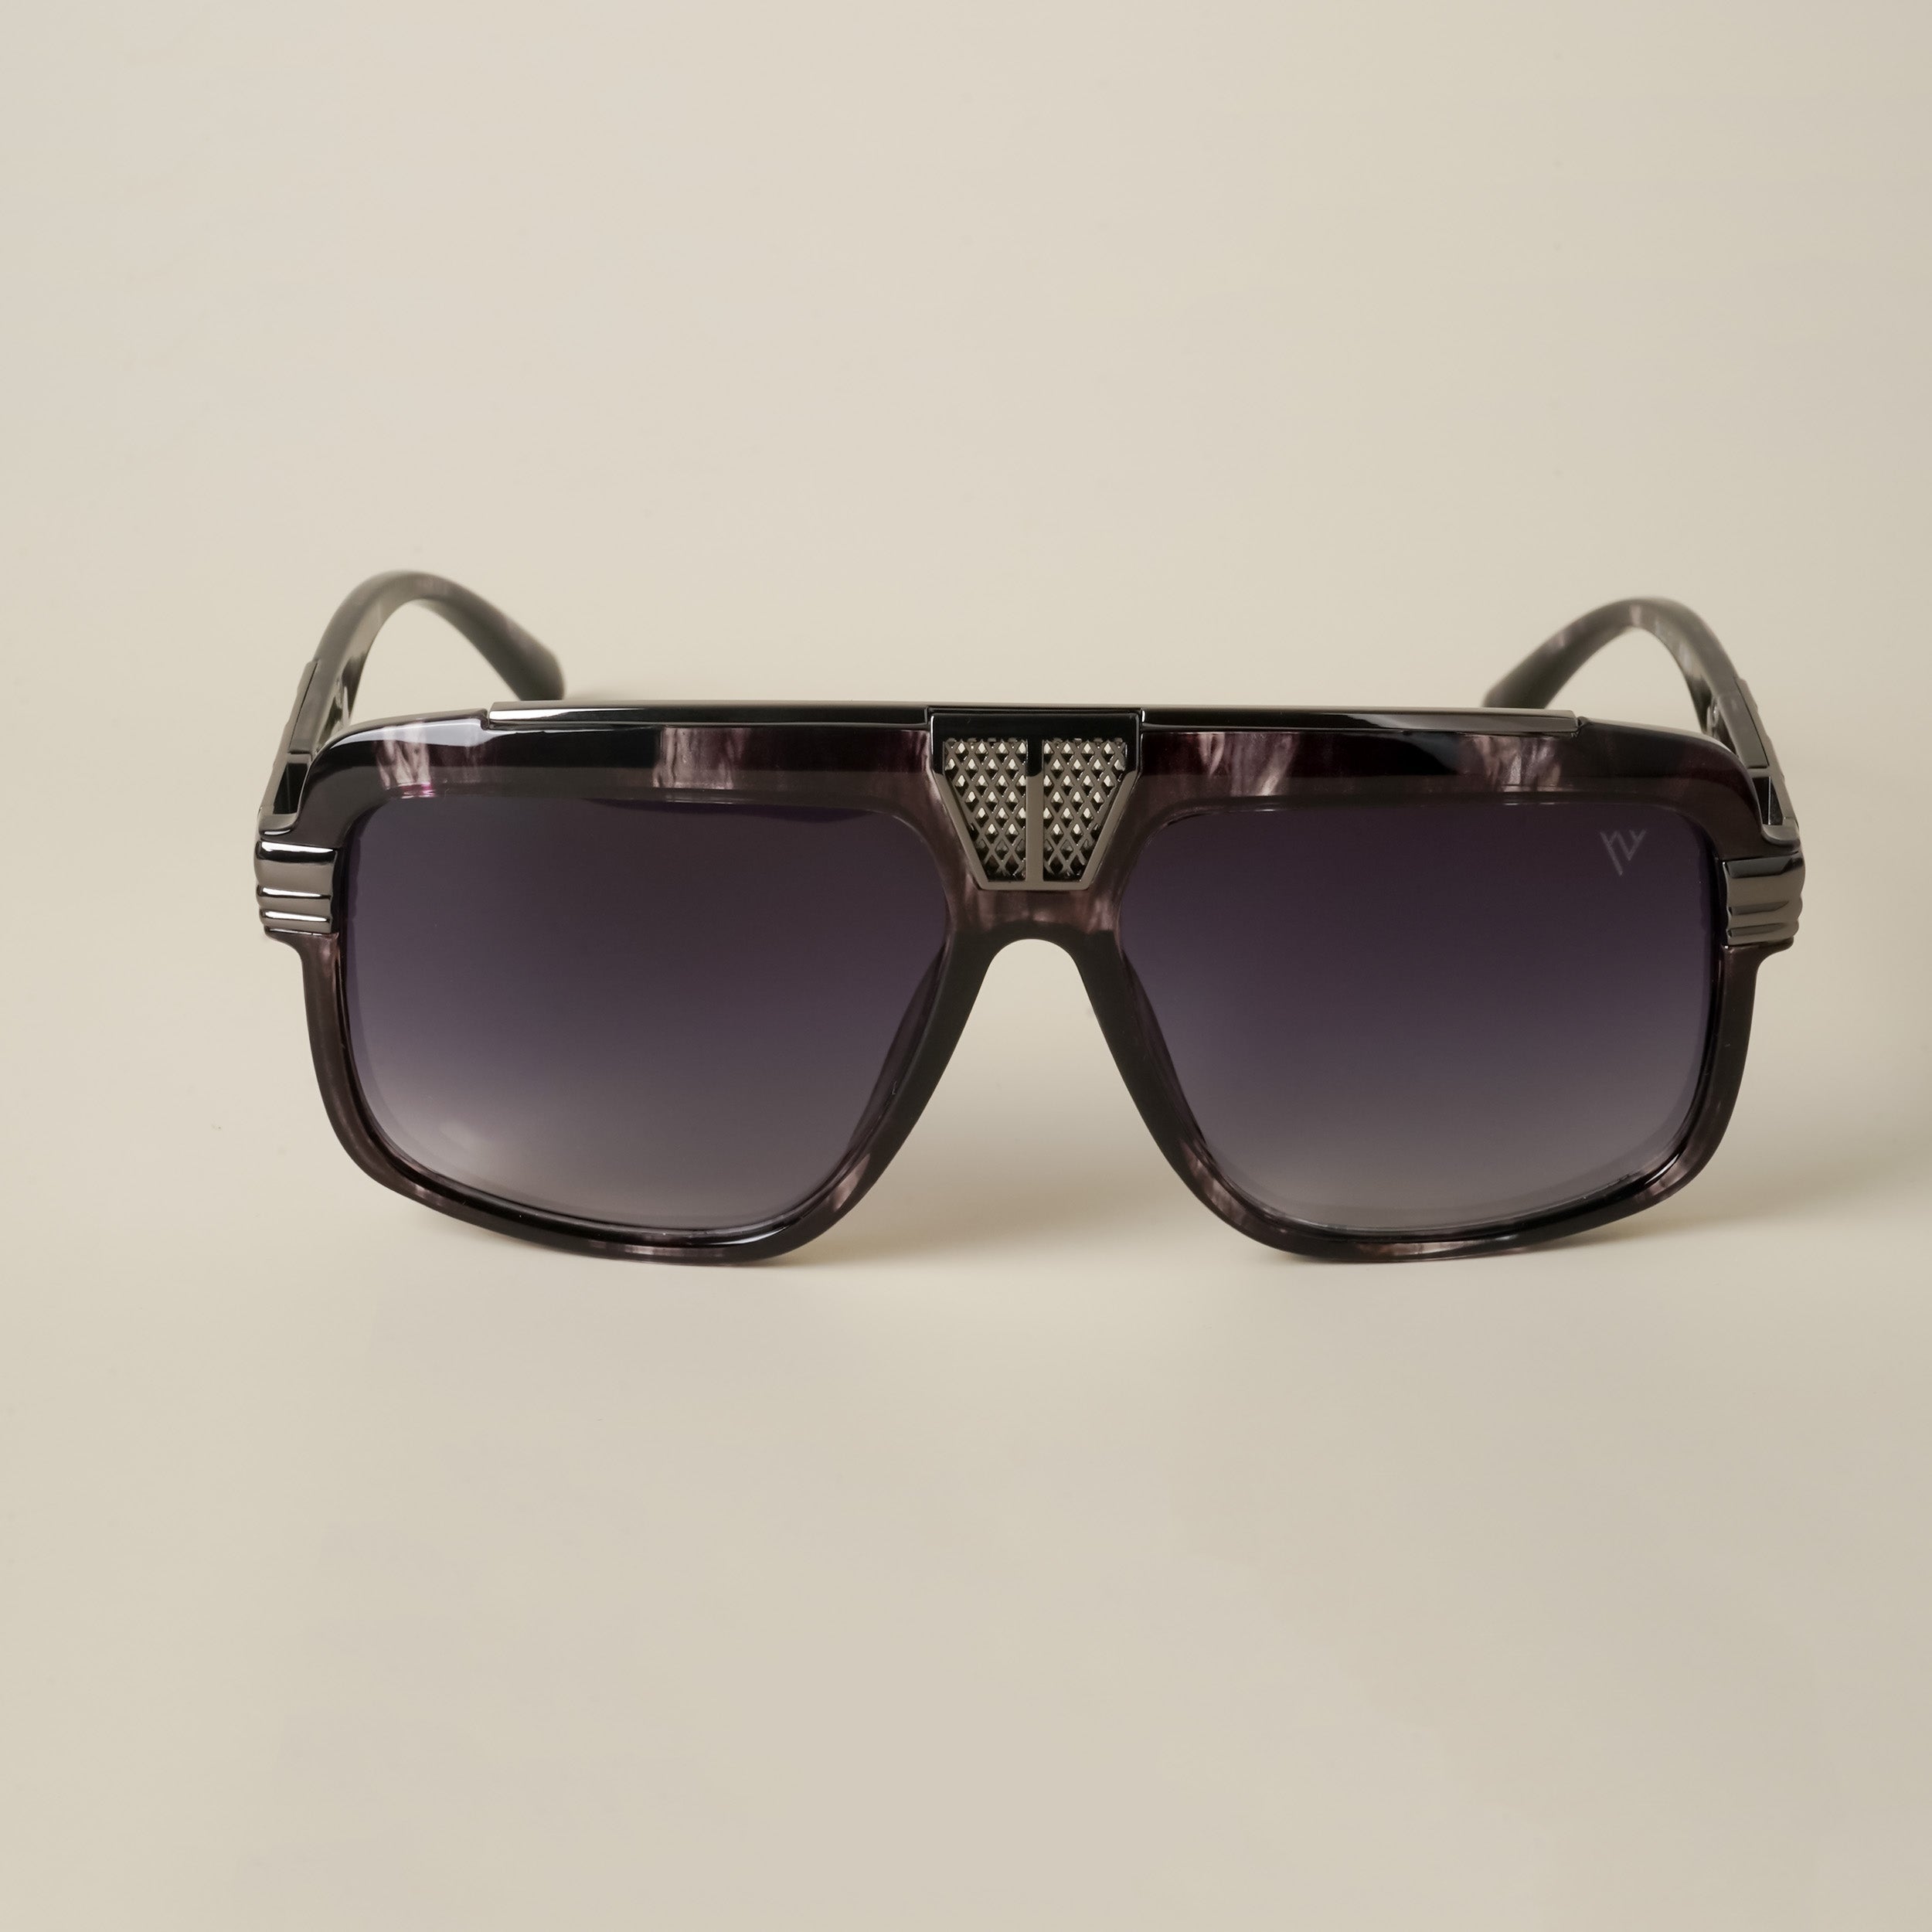 Voyage Grey Over Size Sunglasses for Women - MG4764